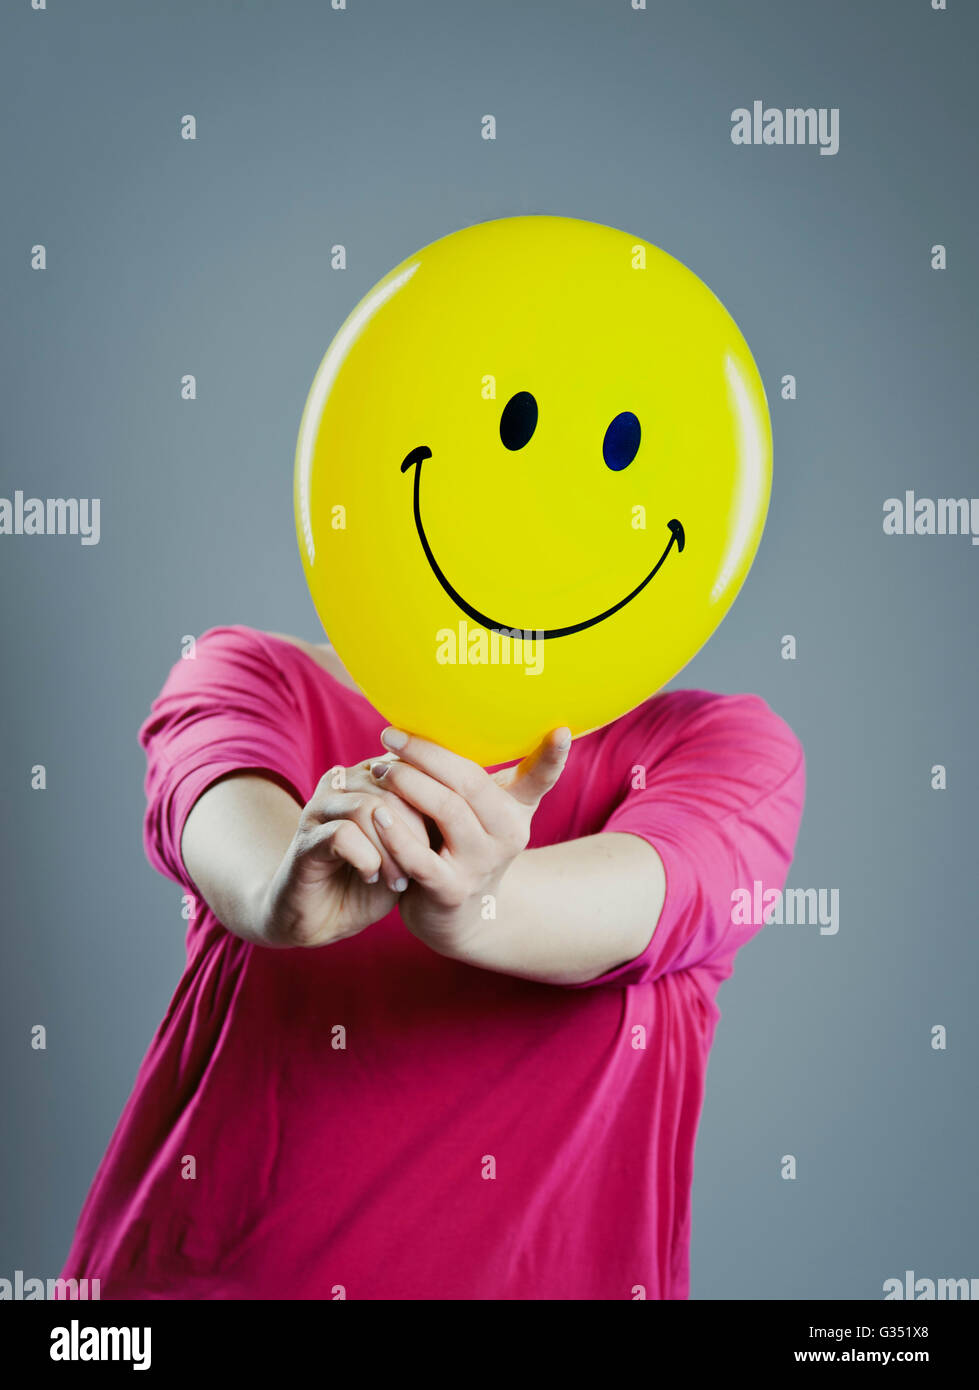 Woman with a smiley face balloon in front of her face Stock Photo